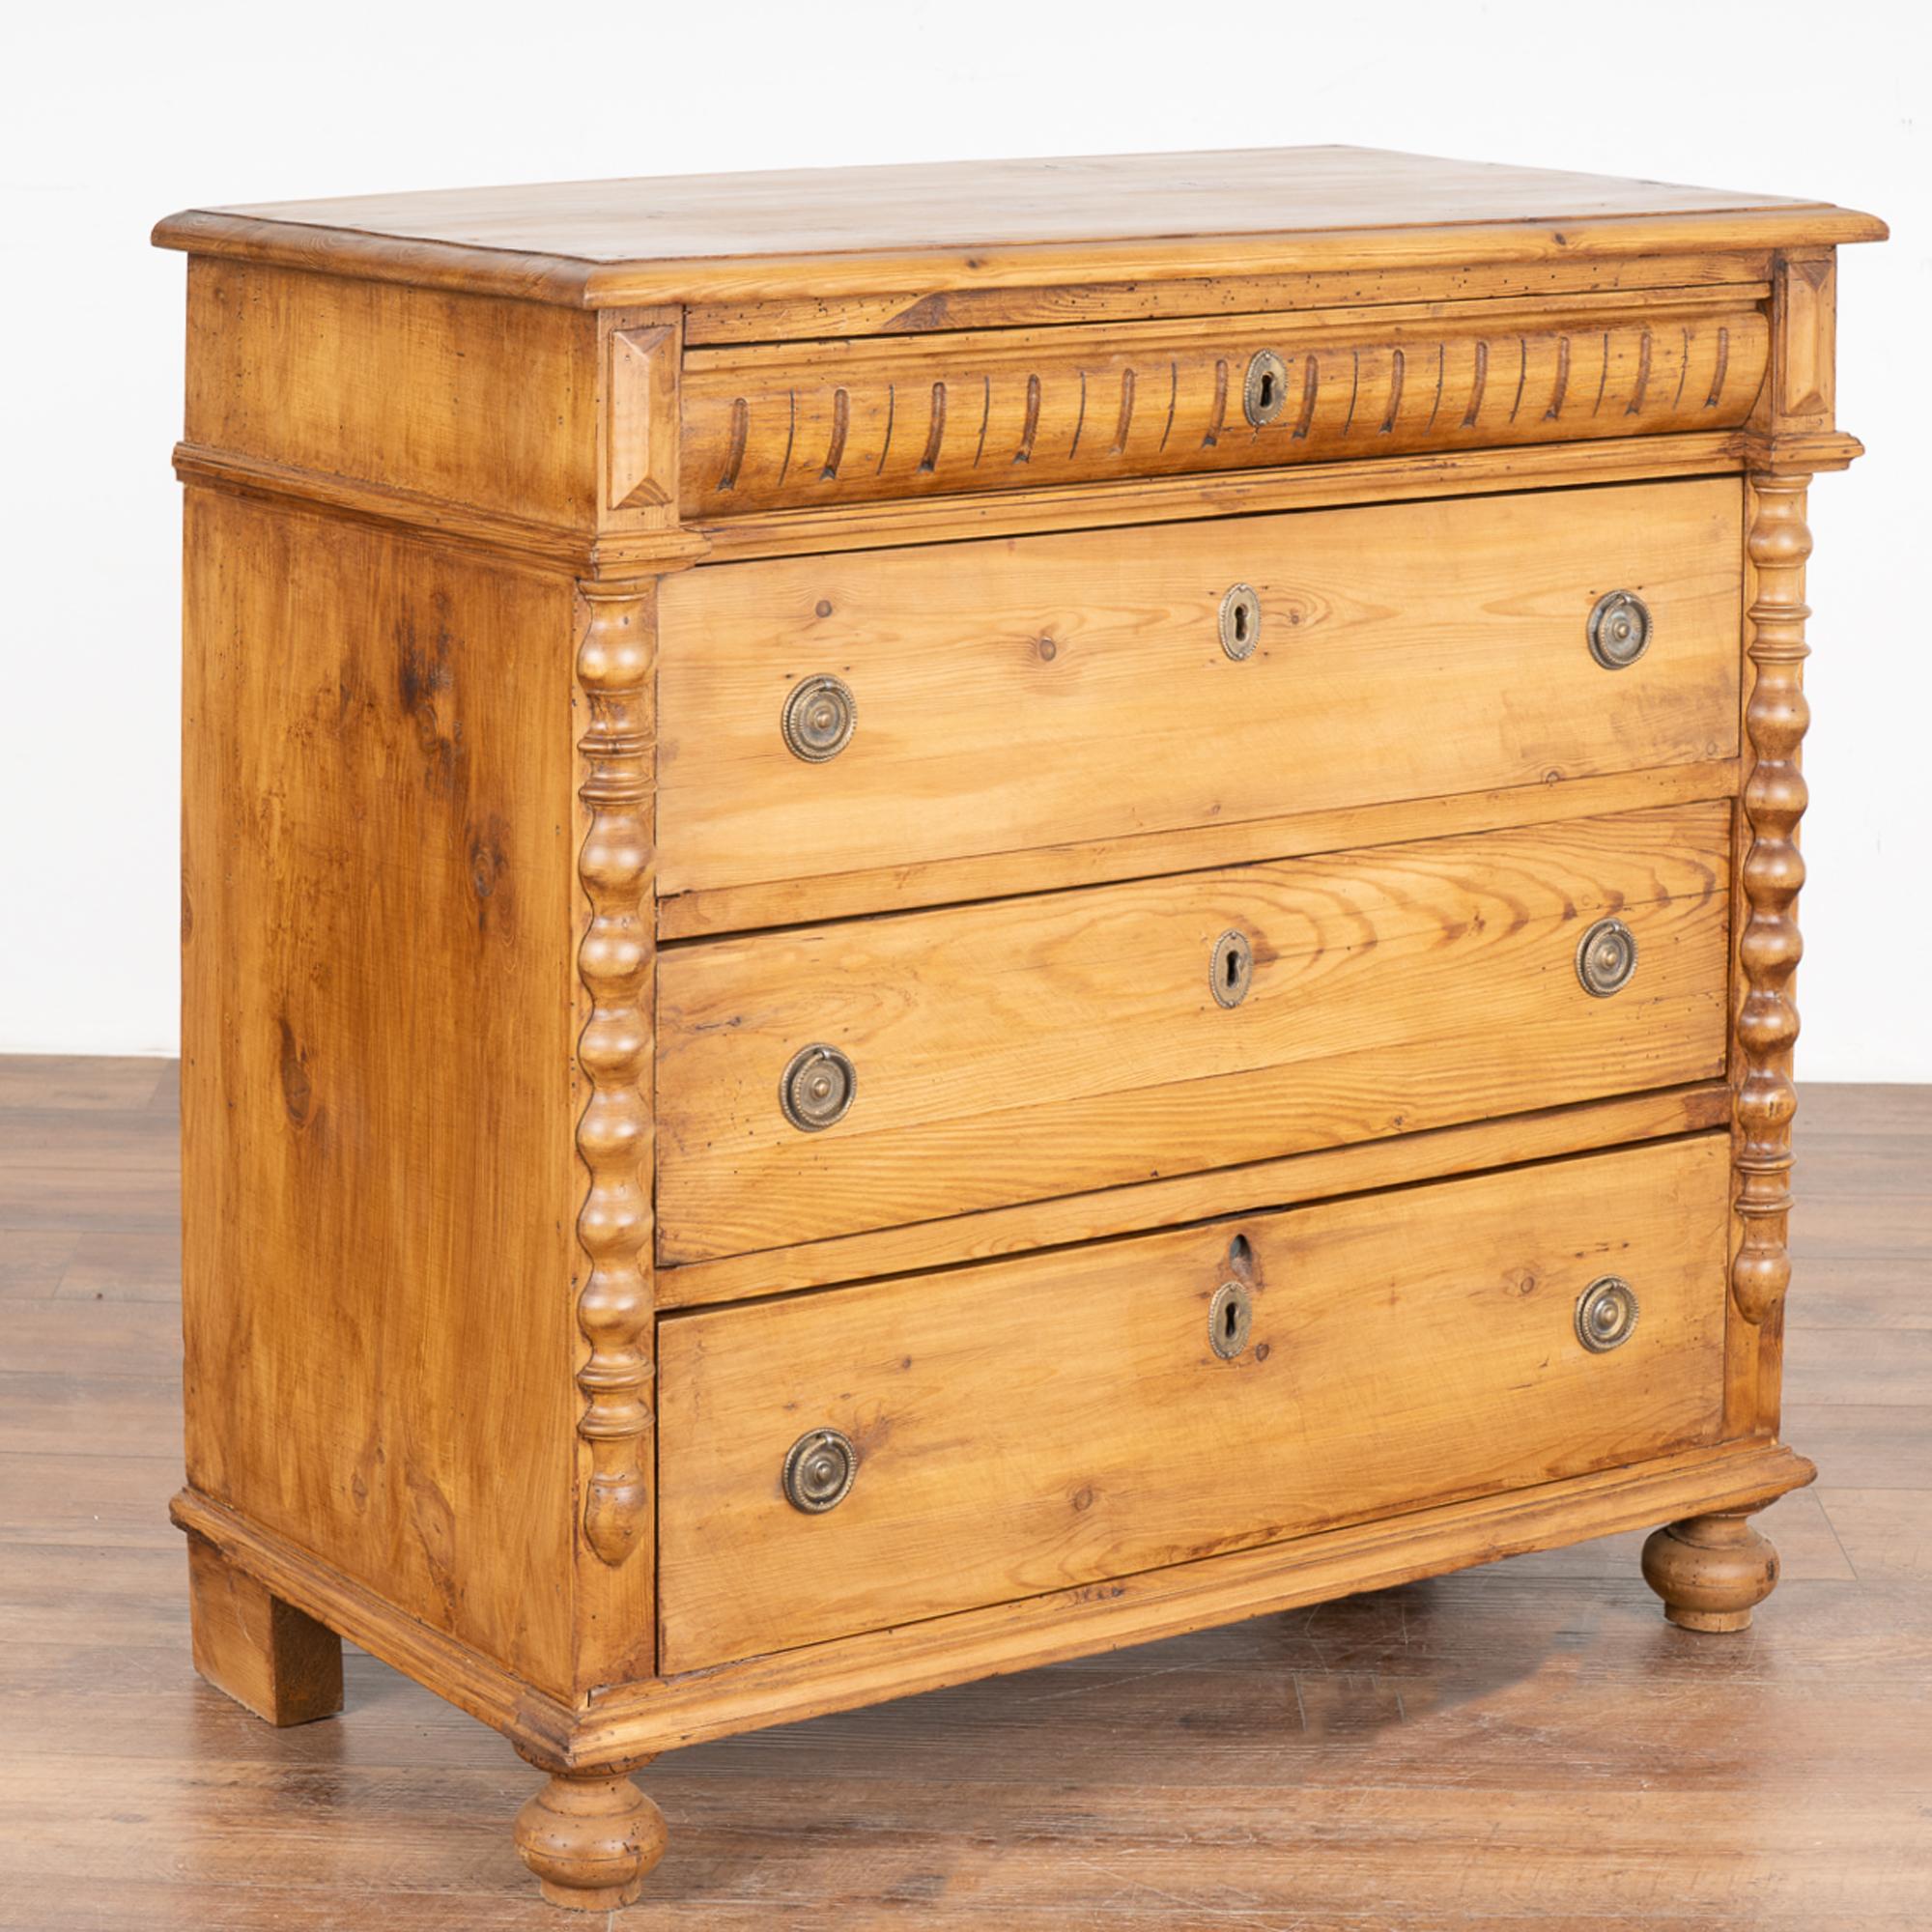 This lovely pine chest of four drawers has decorative half-column details accenting the sides and topped by traditional vertical carving along the upper drawer.
Note the natural wax finish that brings out the warmth of the pine. 
Restored, this